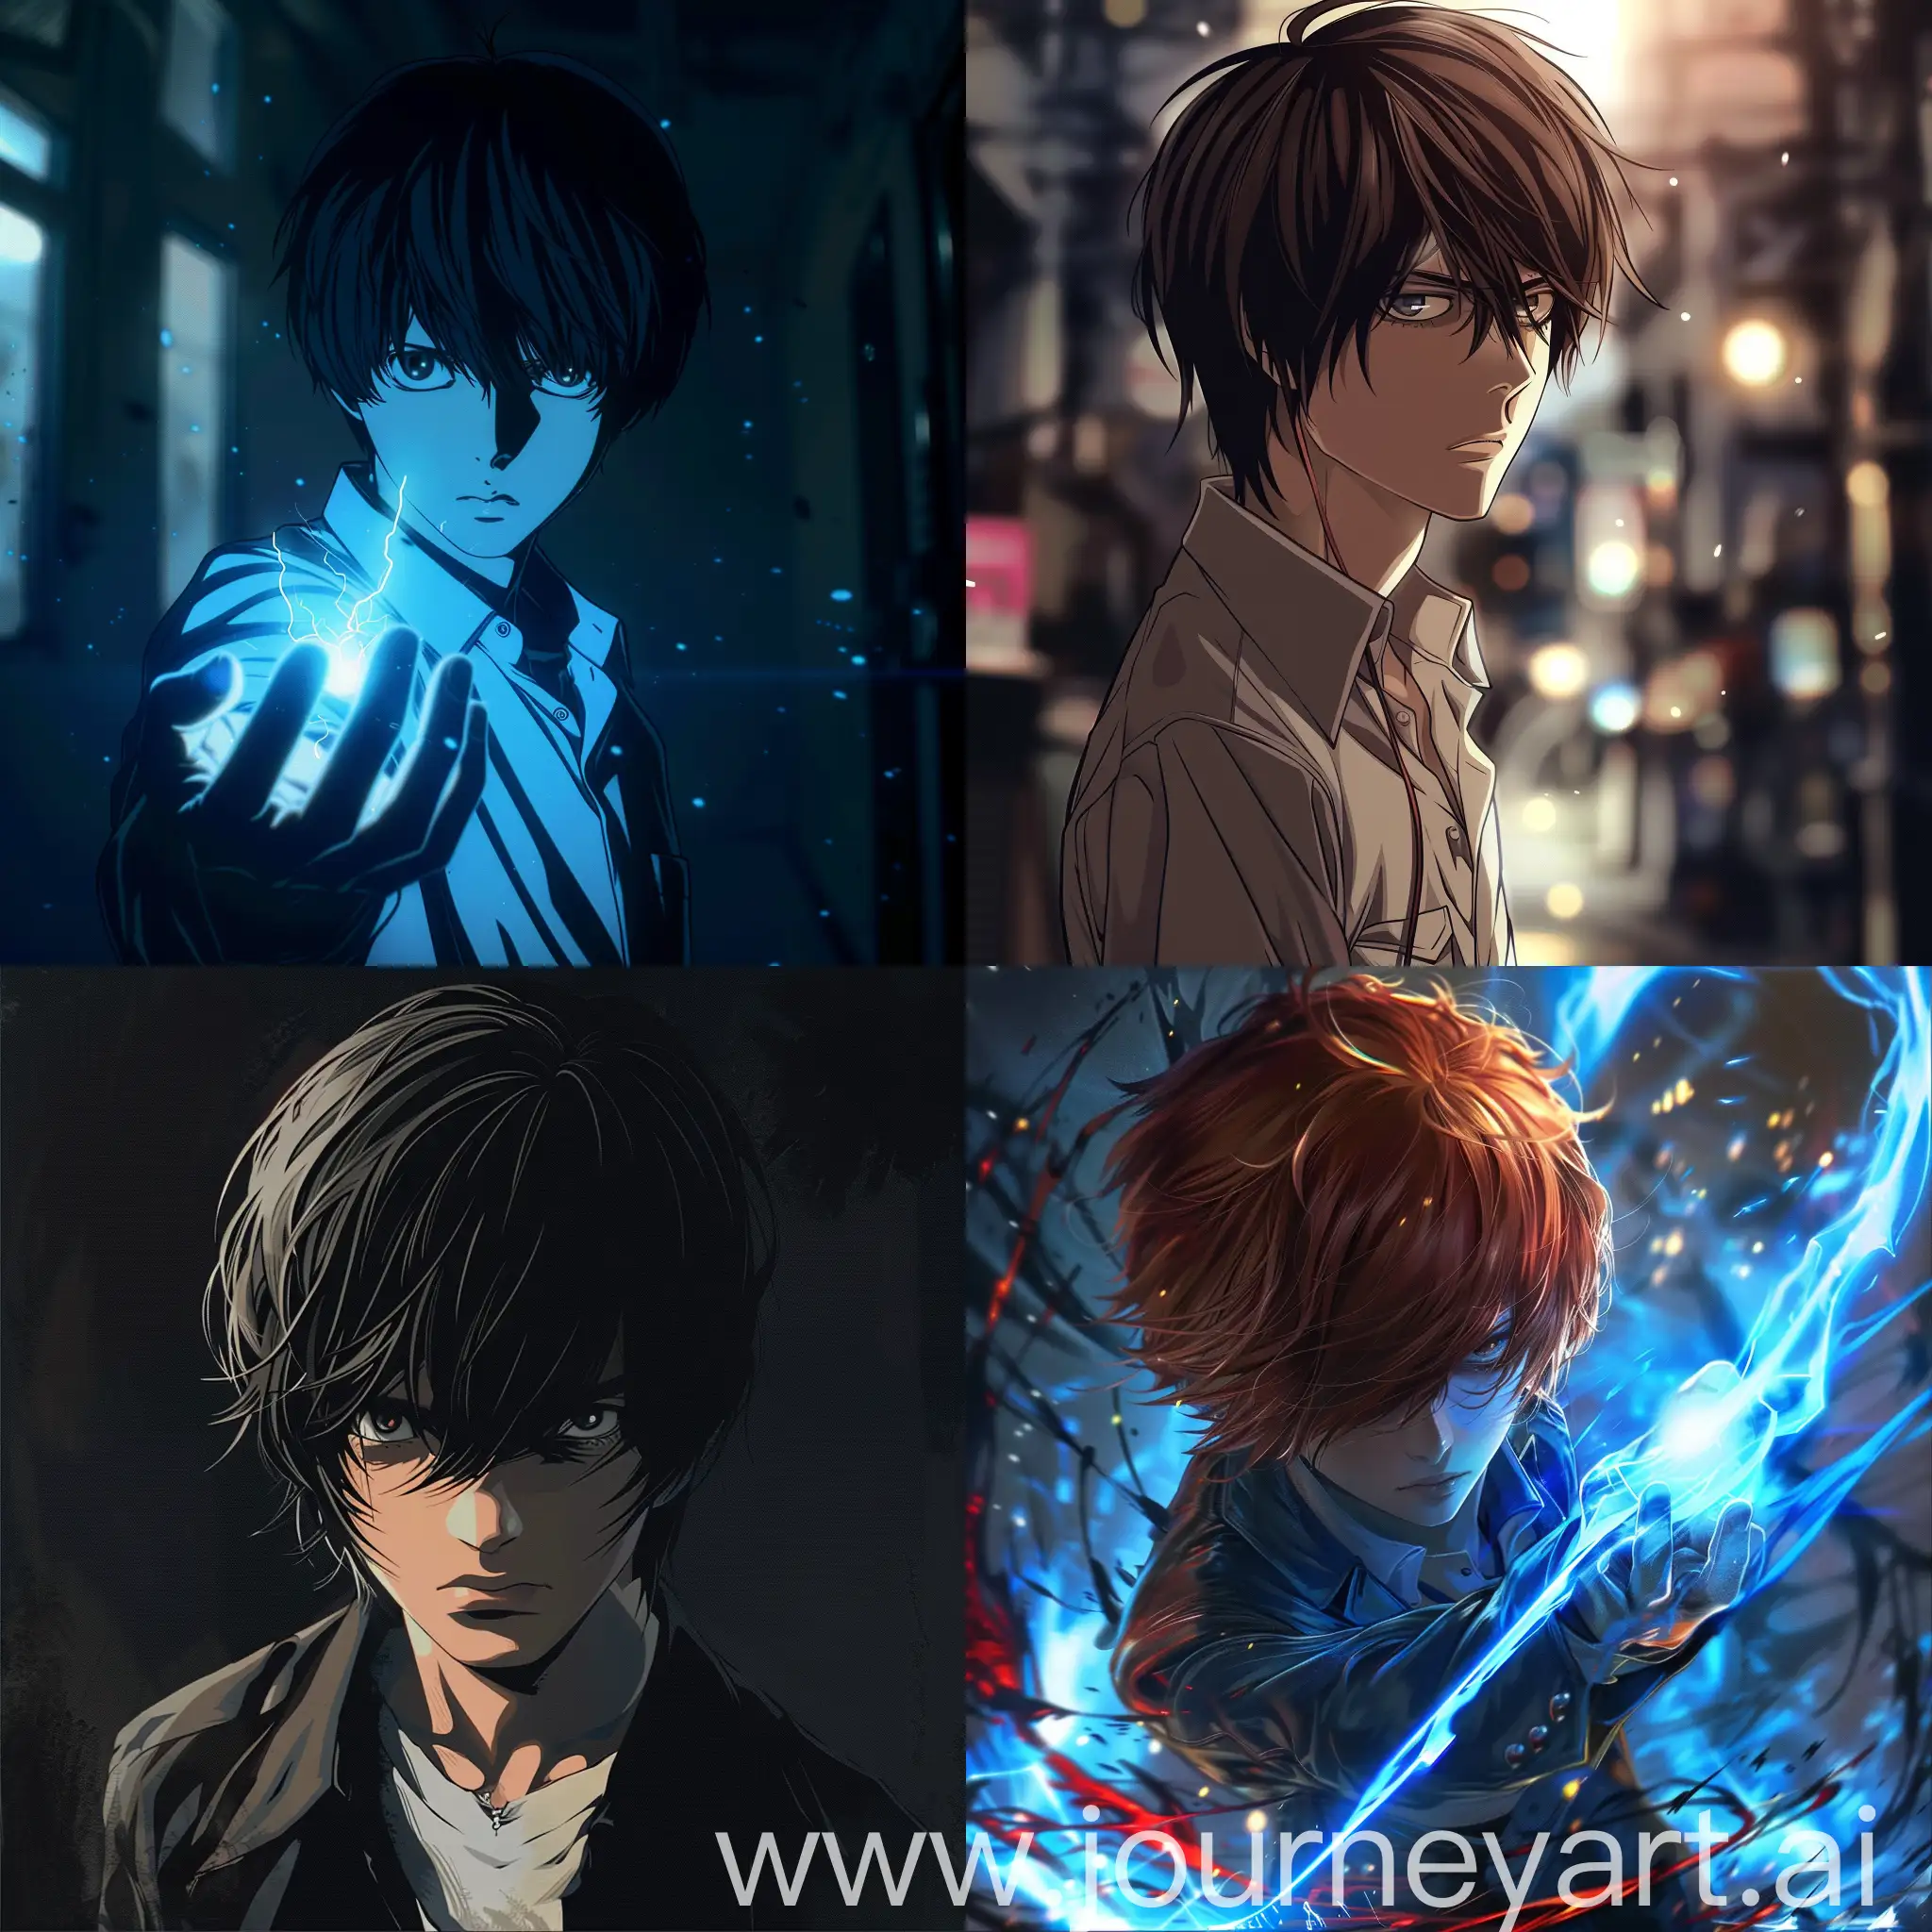 Yagami-Light-Digital-Art-Anime-Character-with-Version-6-Design-in-11-Aspect-Ratio-No-70175